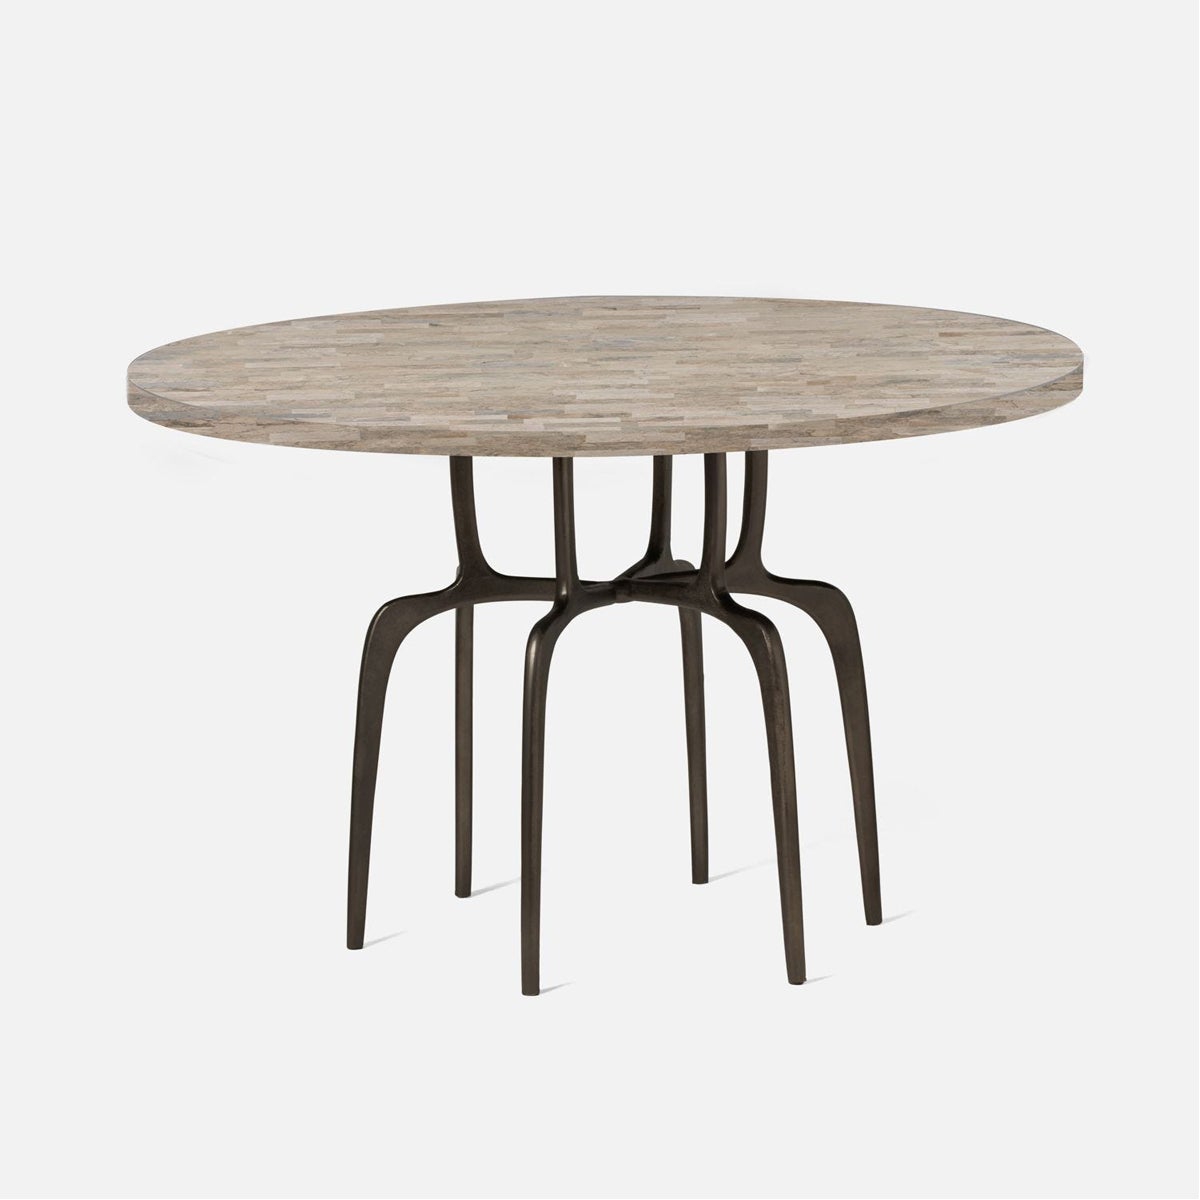 Made Goods Cyrano Metal Dining Table in Warm Gray Marble